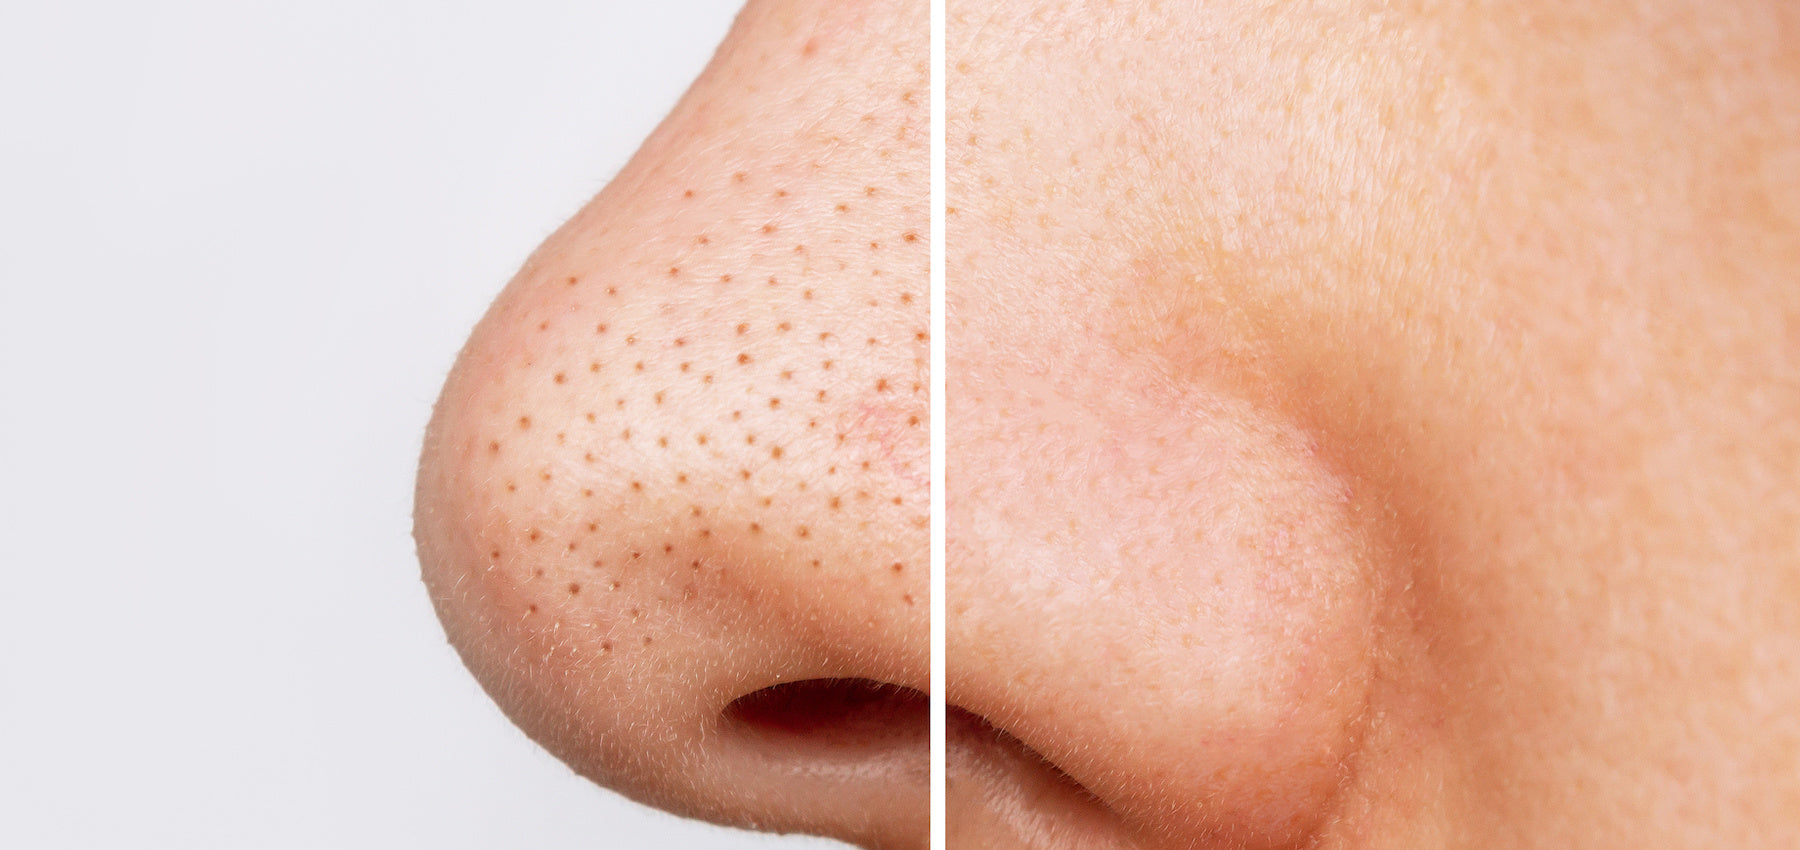 Can You Pop Blackheads? How to Treat & Prevent Them